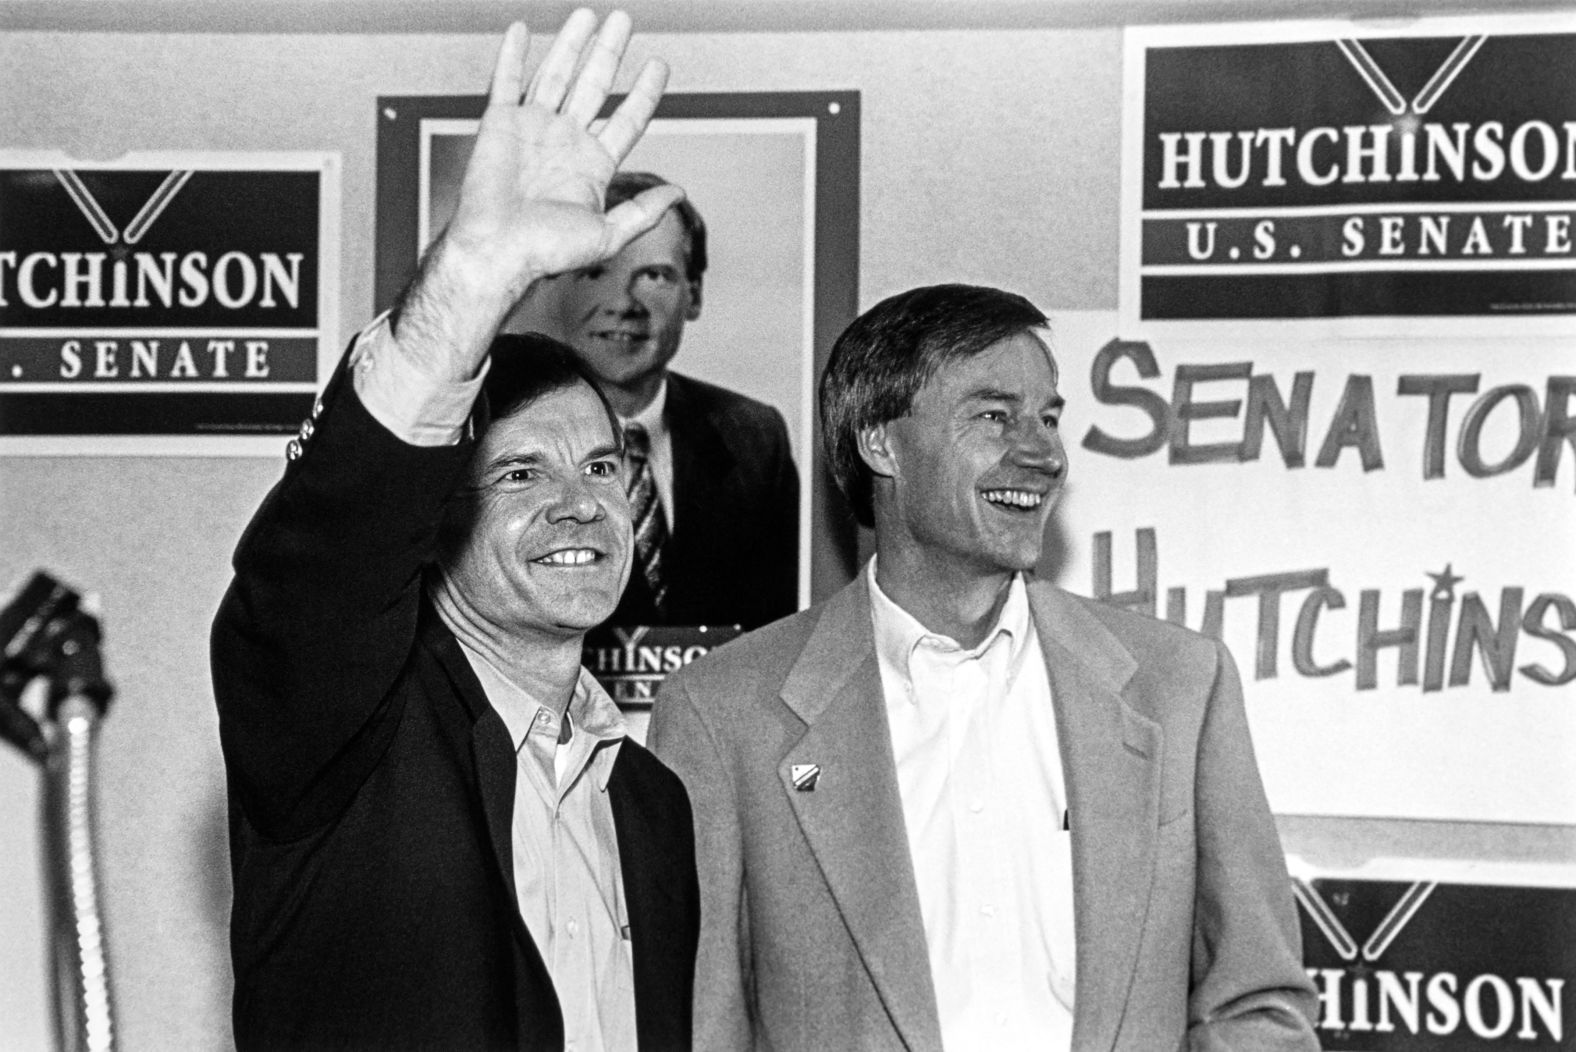 Hutchinson, right, and his older brother, Tim, attend a victory party in Fayetteville, Arkansas, in 1996. Asa Hutchinson had just been elected to the US House of Representatives. He succeeded Tim, who was elected to the US Senate.